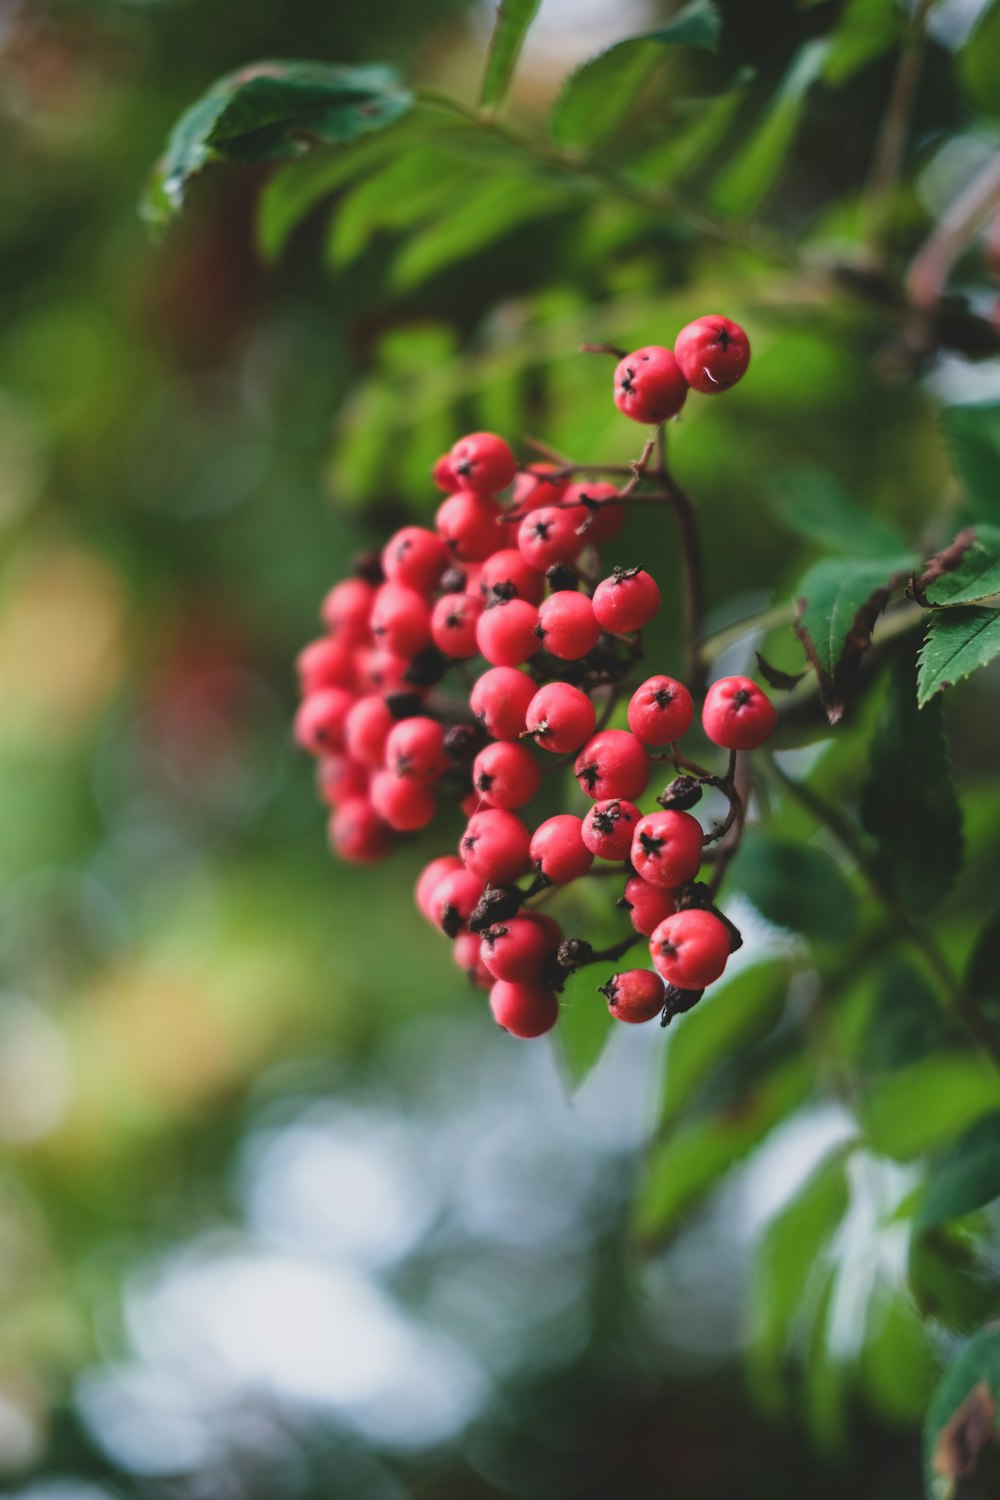 selective focus photography of round red fruits during daytime